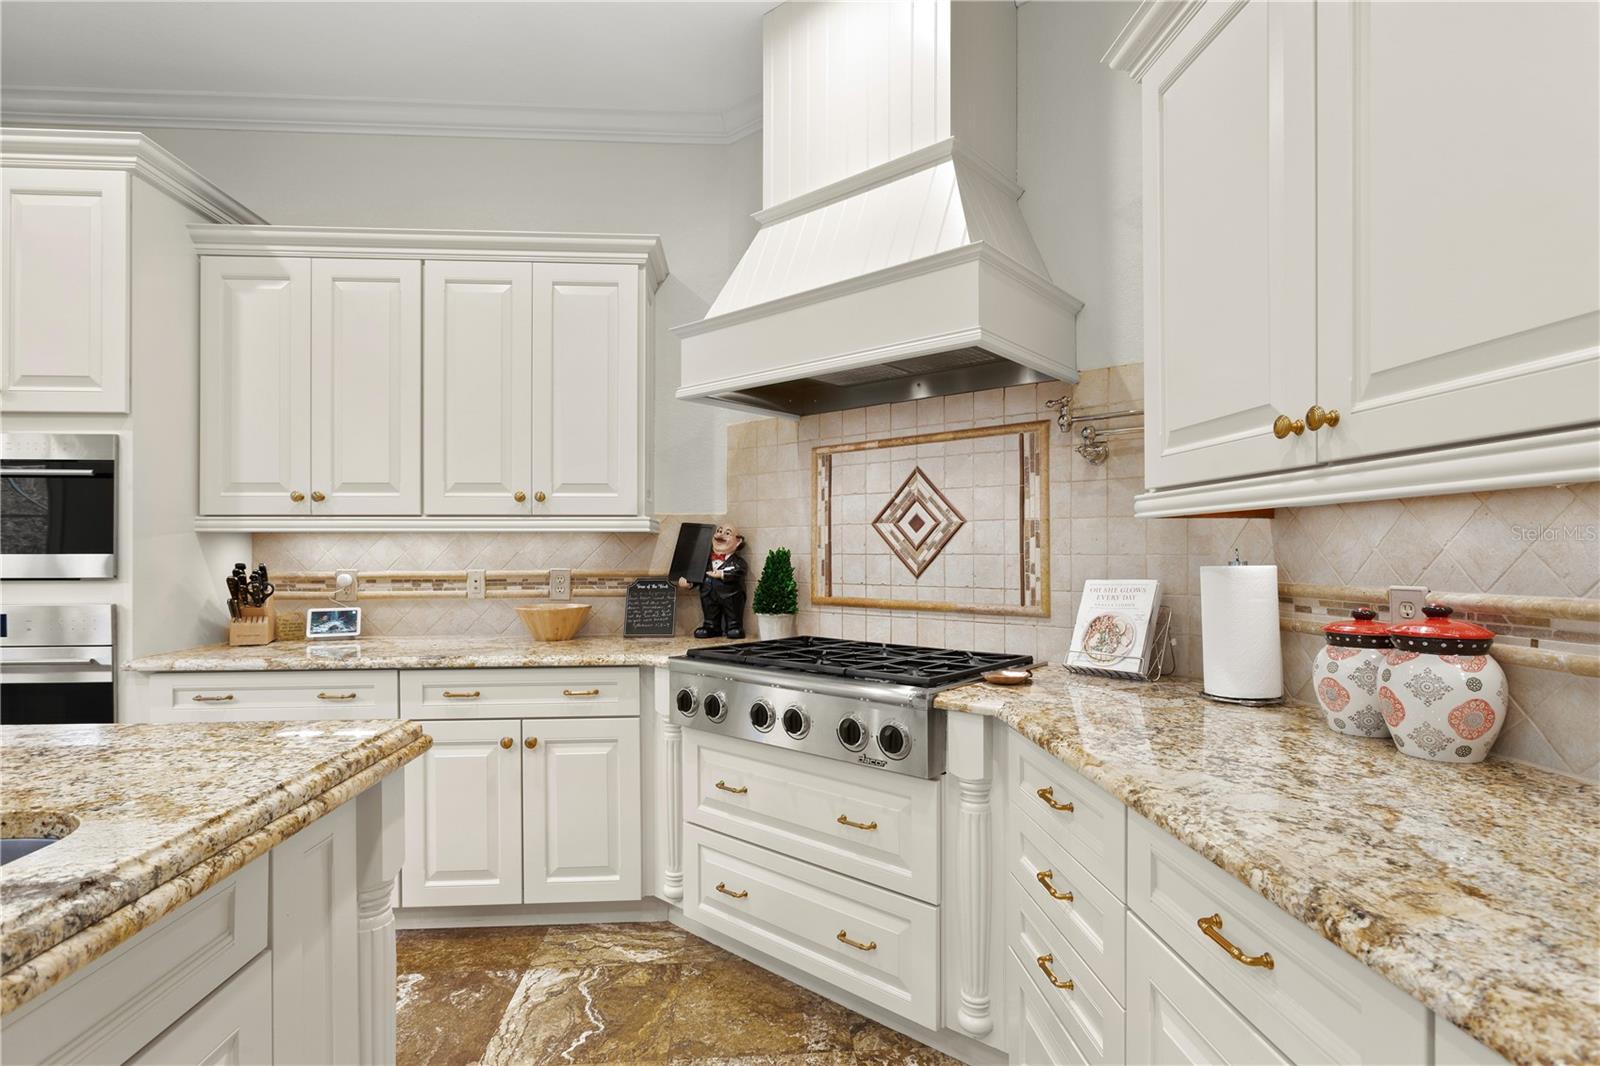 A gorgeous, remodeled kitchen is anything but ordinary with stunning cabinetry and tiled backsplash!